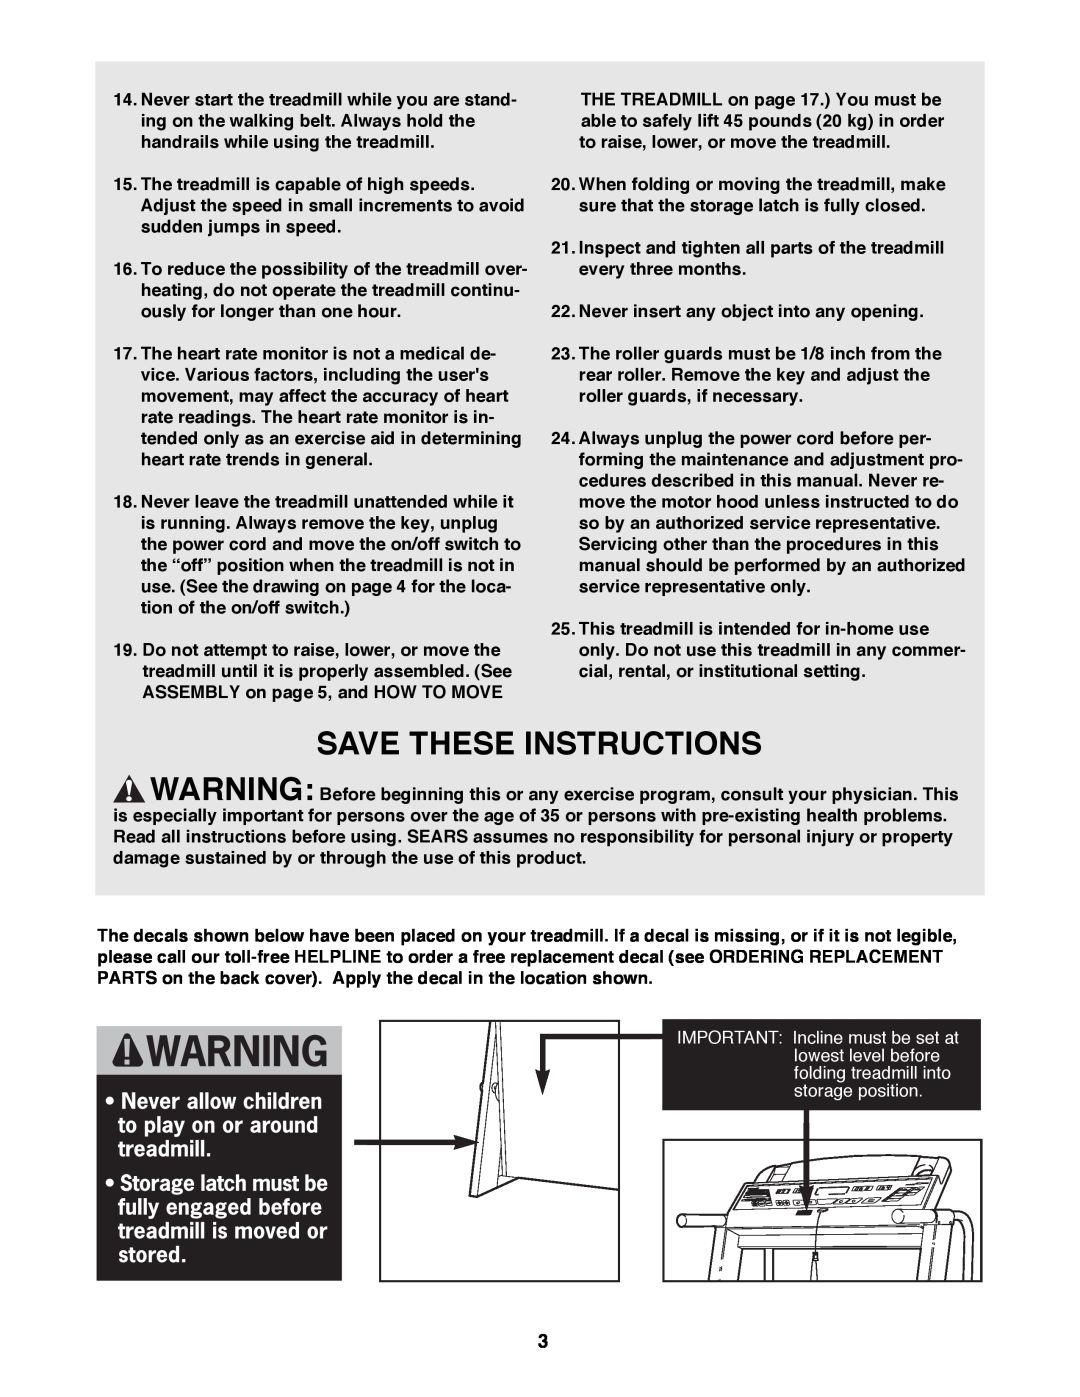 Image 831.297572 user manual Save These Instructions, Inspect and tighten all parts of the treadmill every three months 